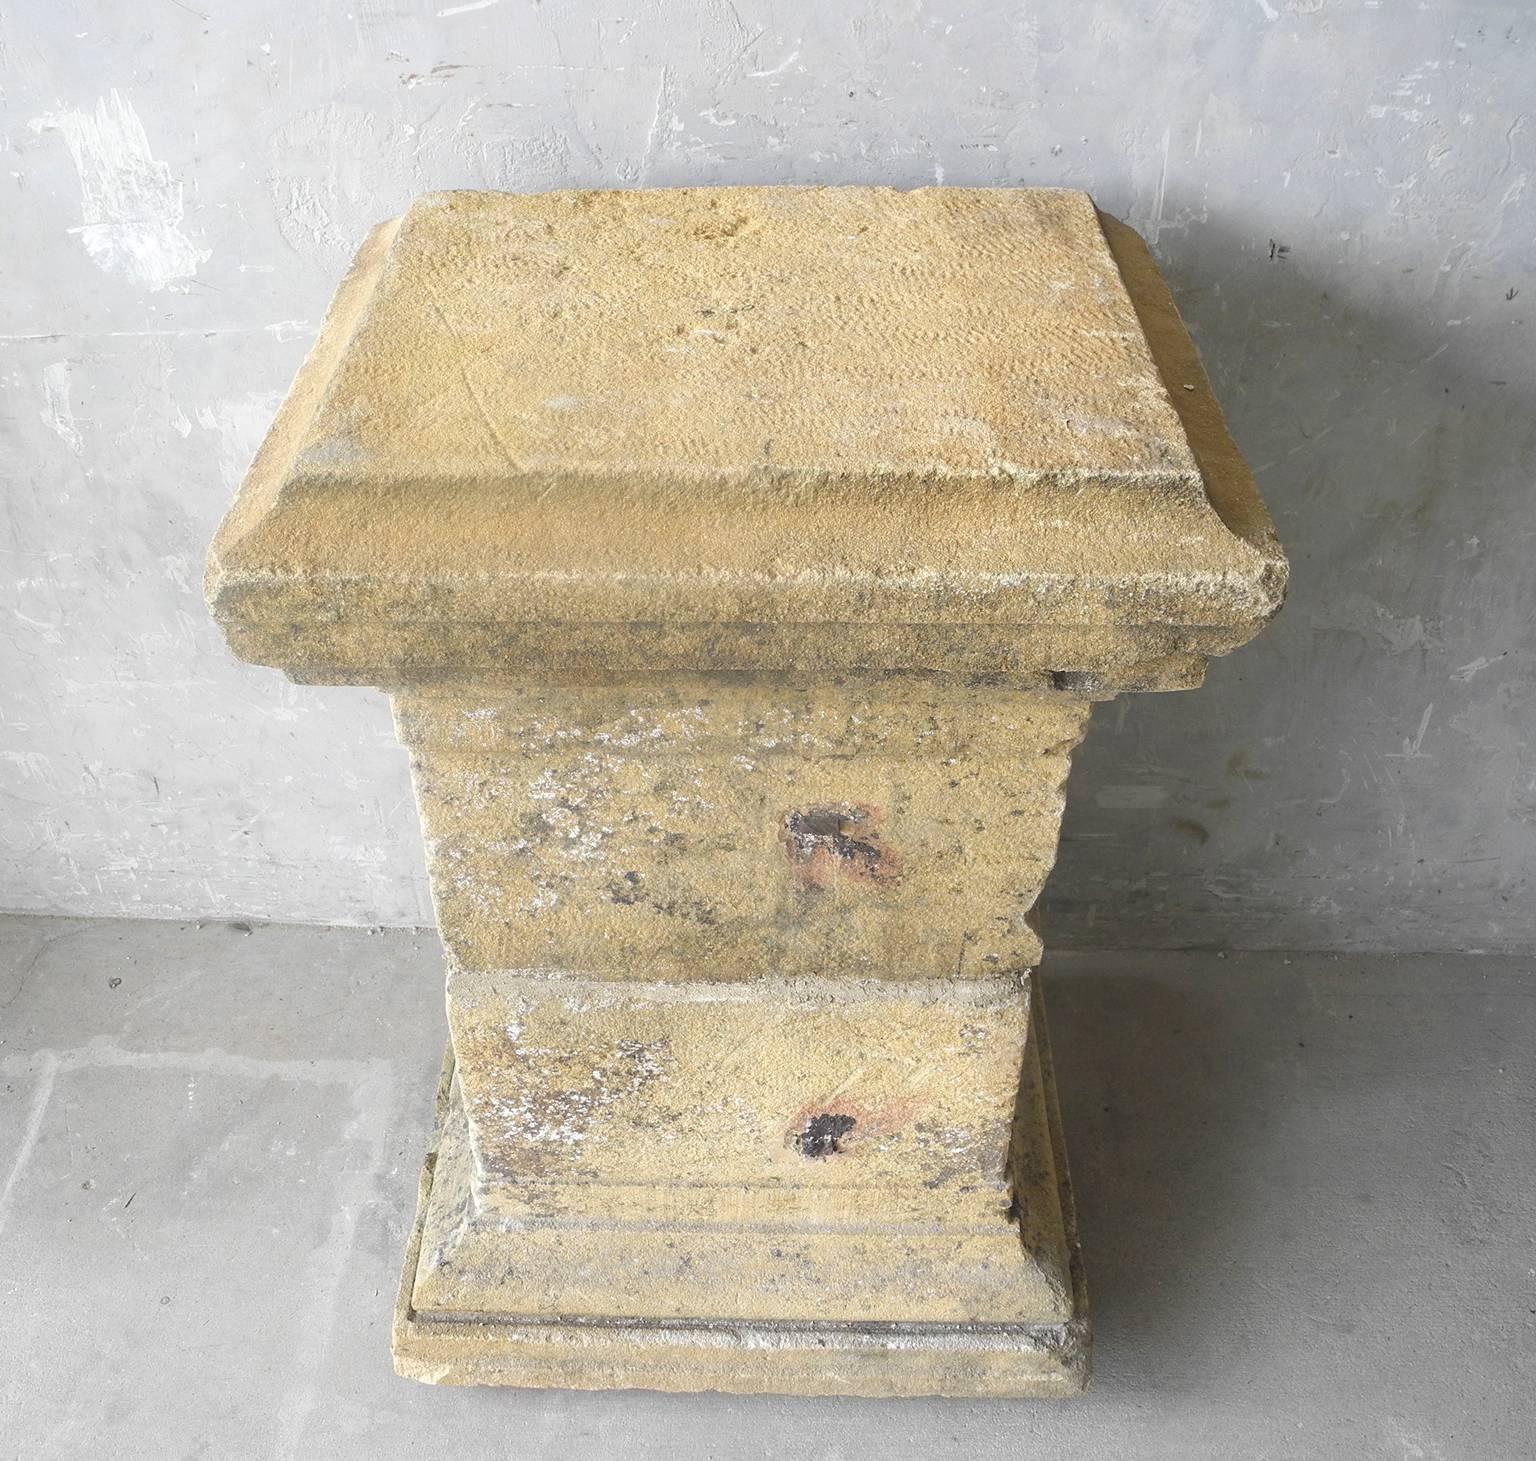 This column is made of limestone and is from the 18th century. It was found in the village of Charlieu in Loire. It has a more yellow in it than regular limestone pieces. It stands at a medium height, perfect as a pedestal to showcase another